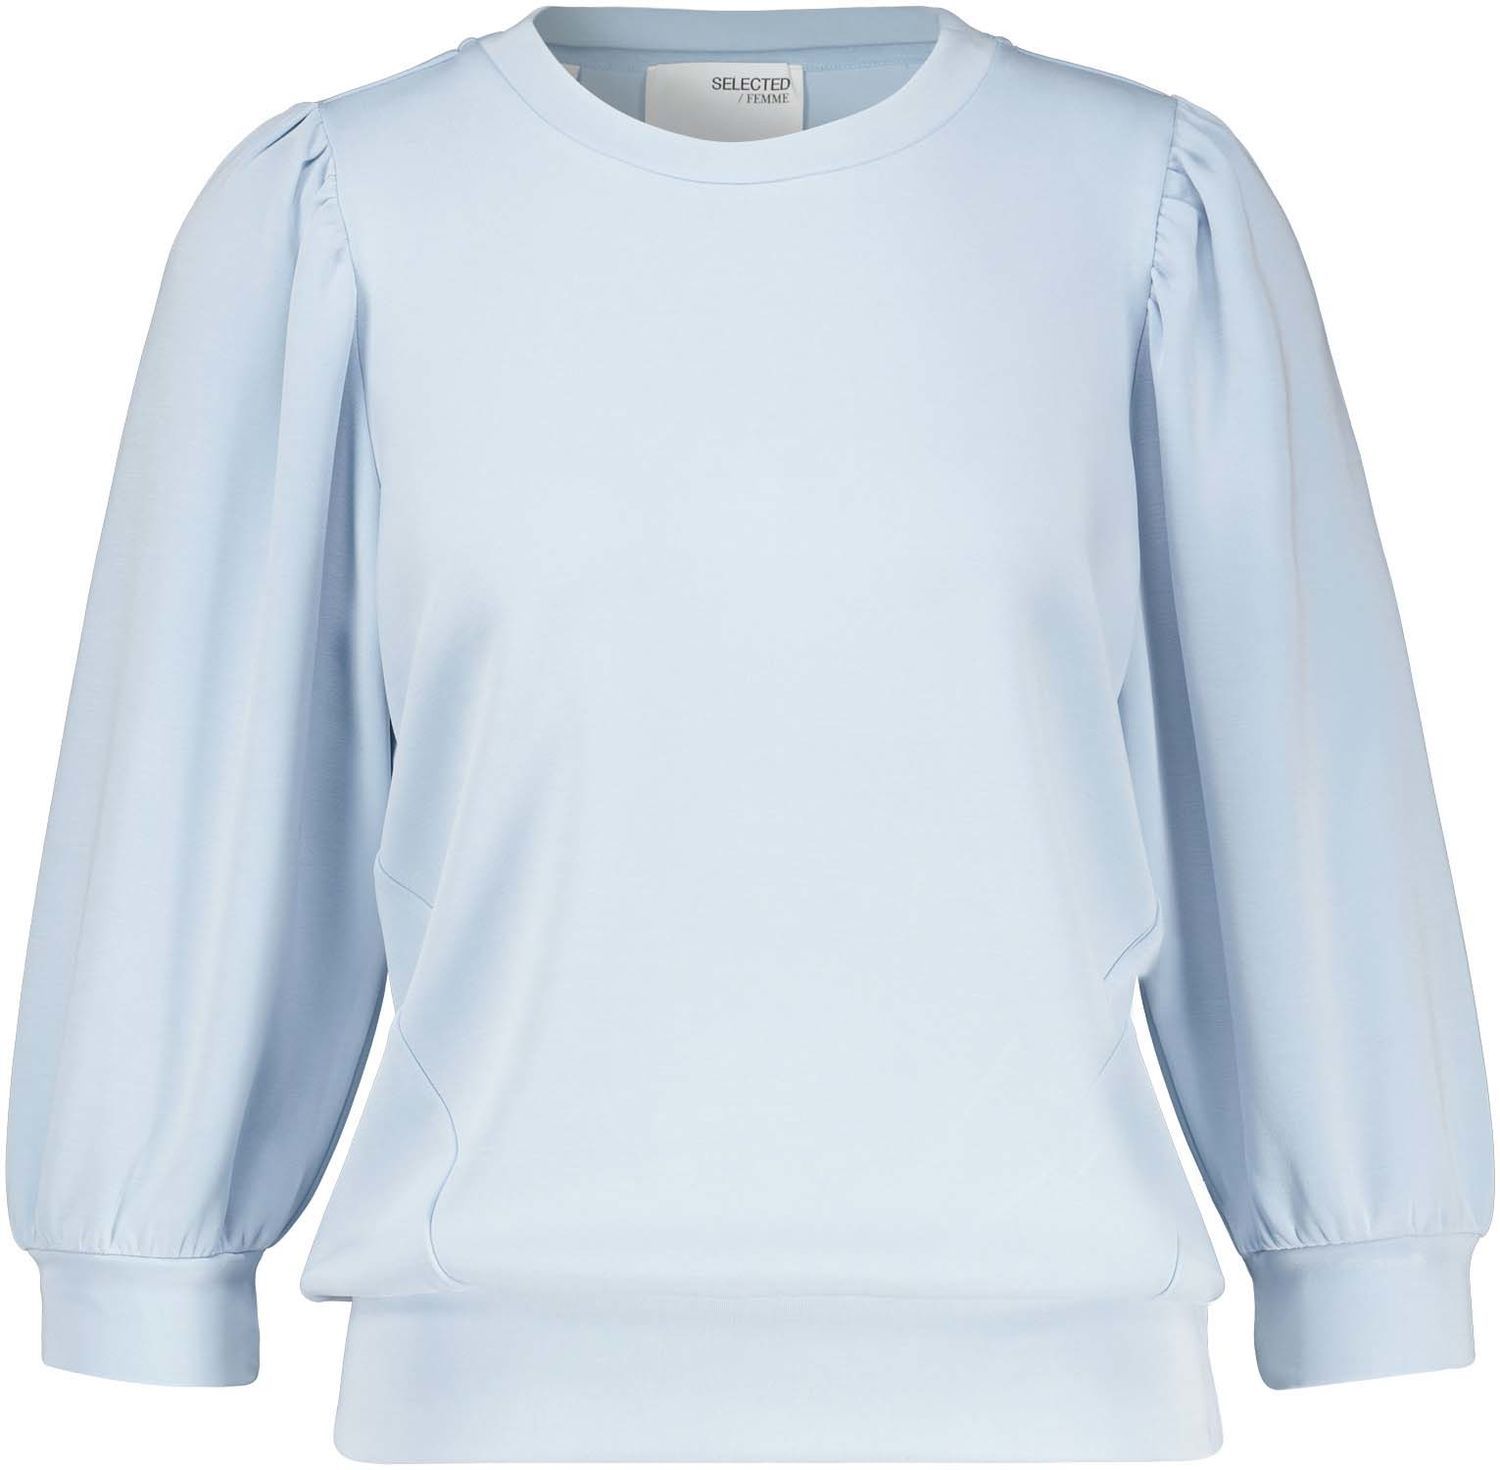 Selected Femme Top Tenny Blauw 